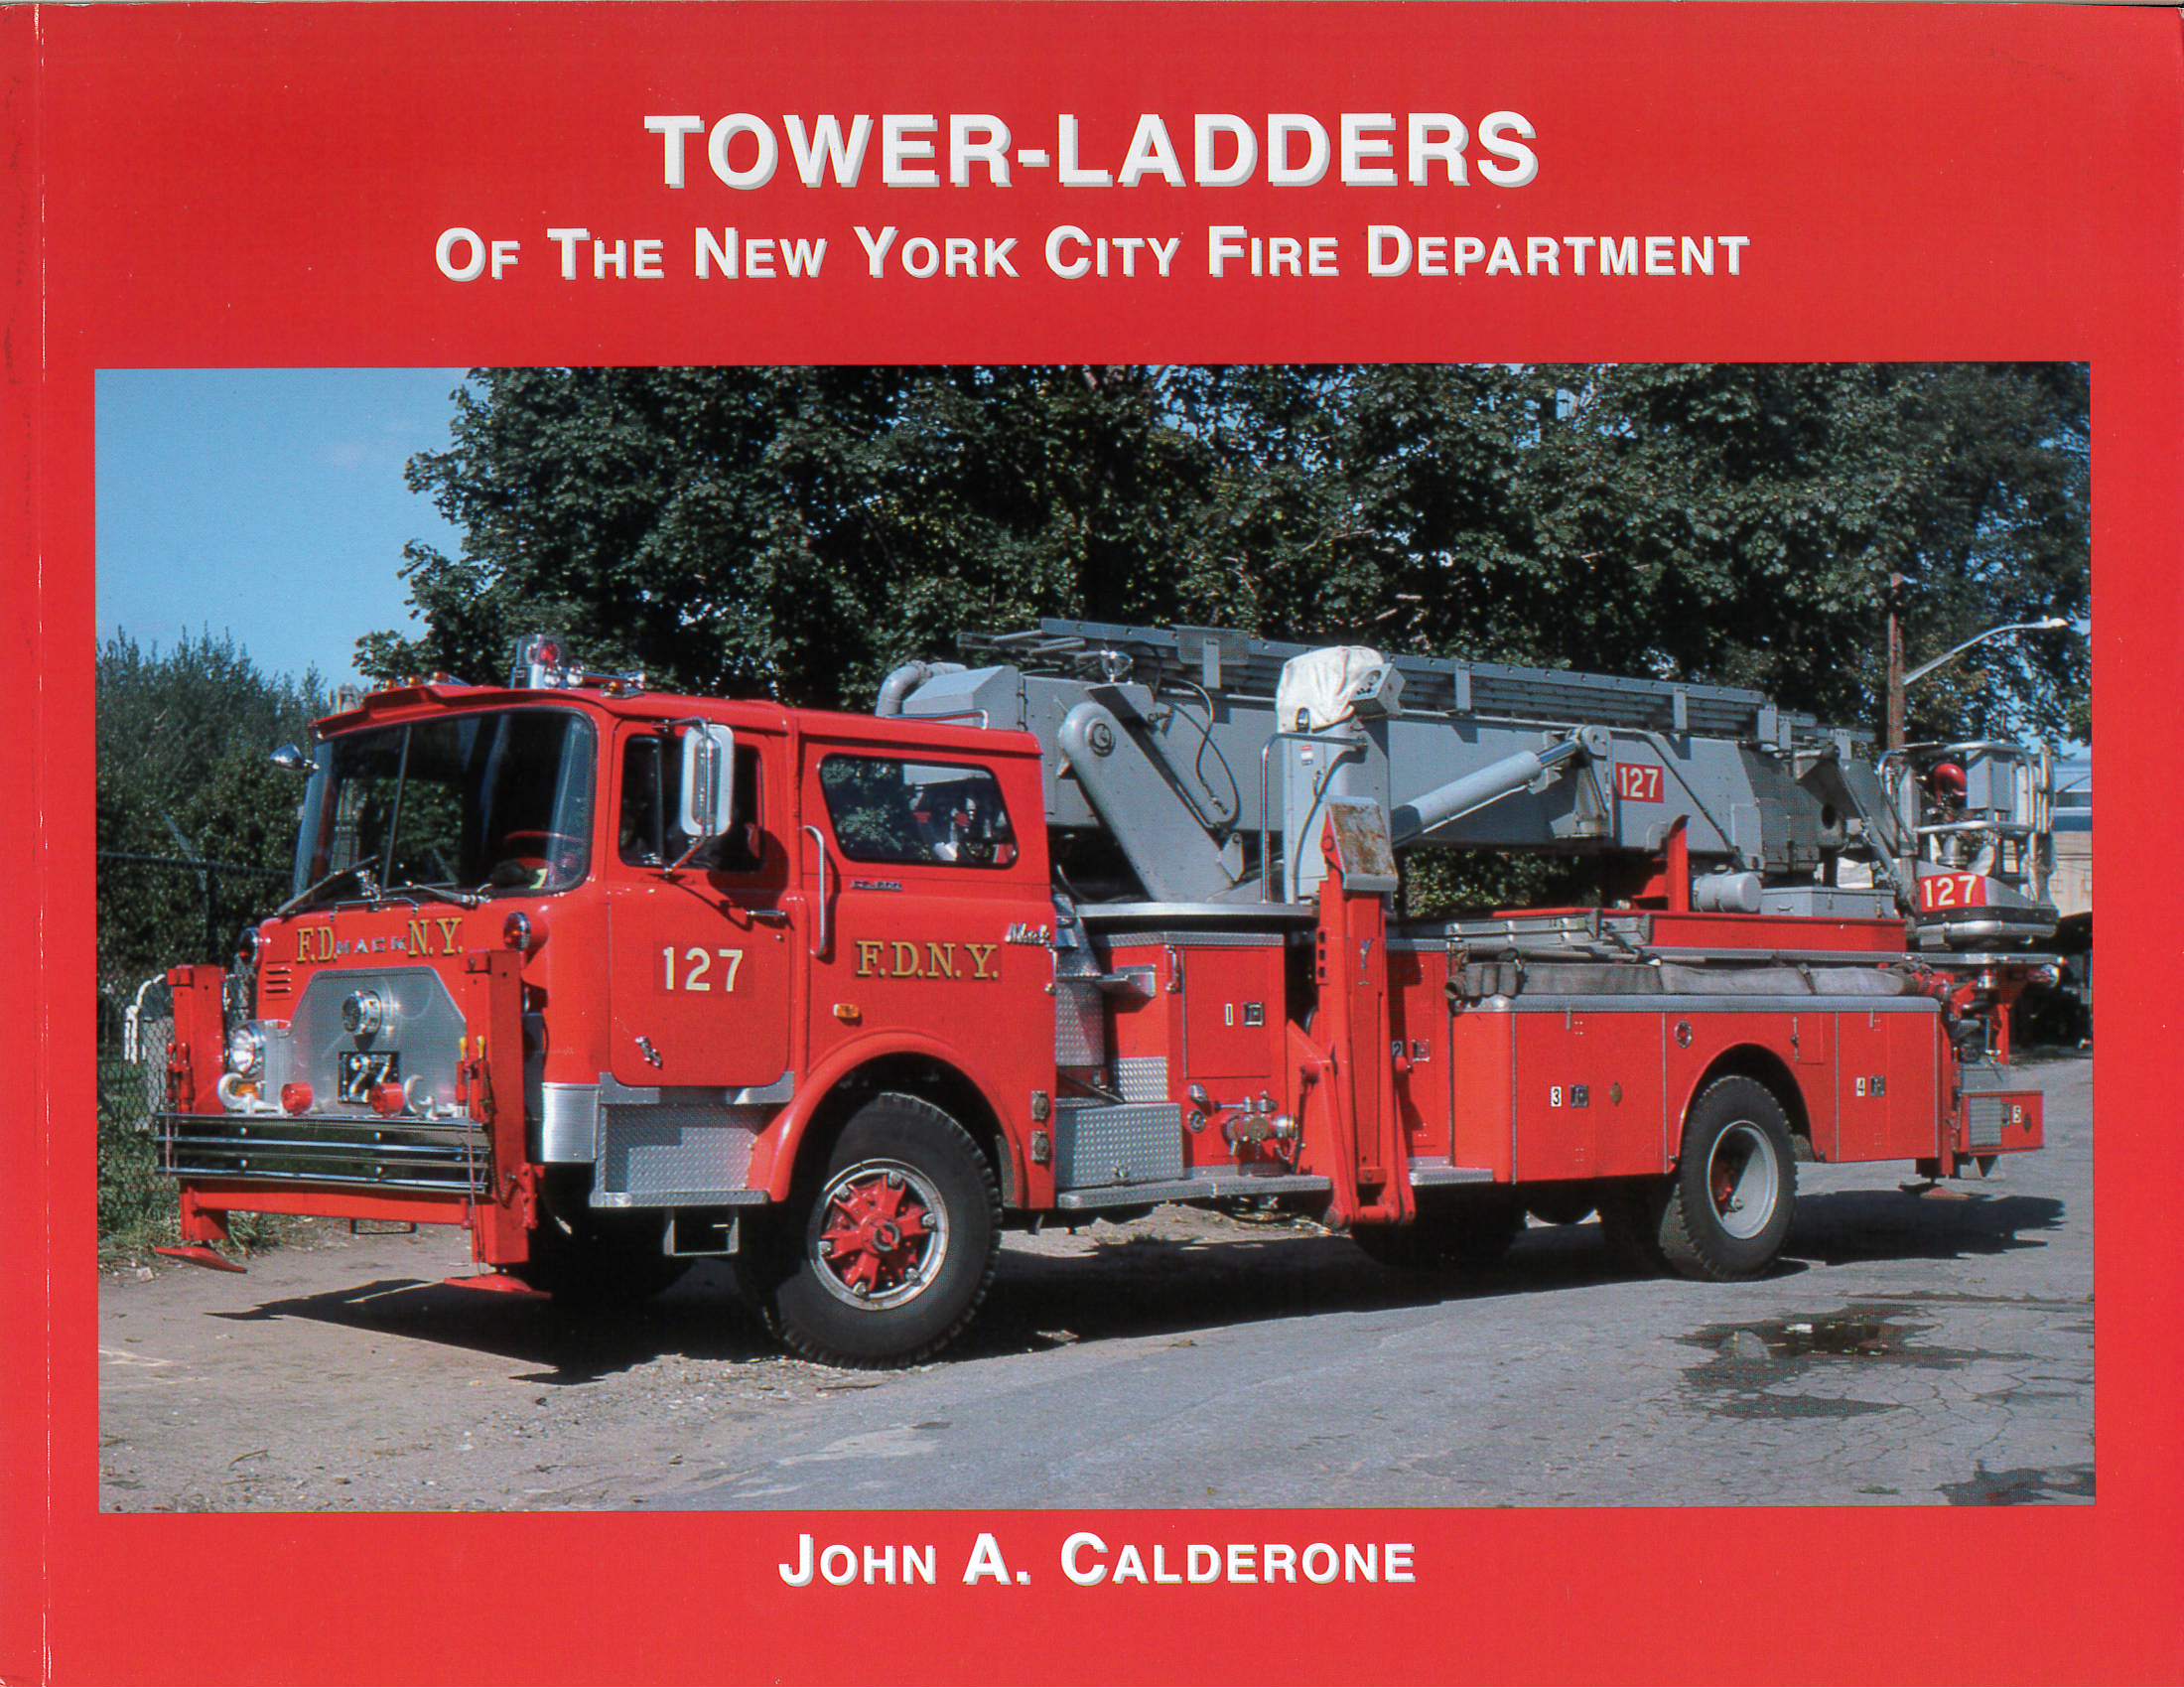 Tower-Ladders of NYC FD